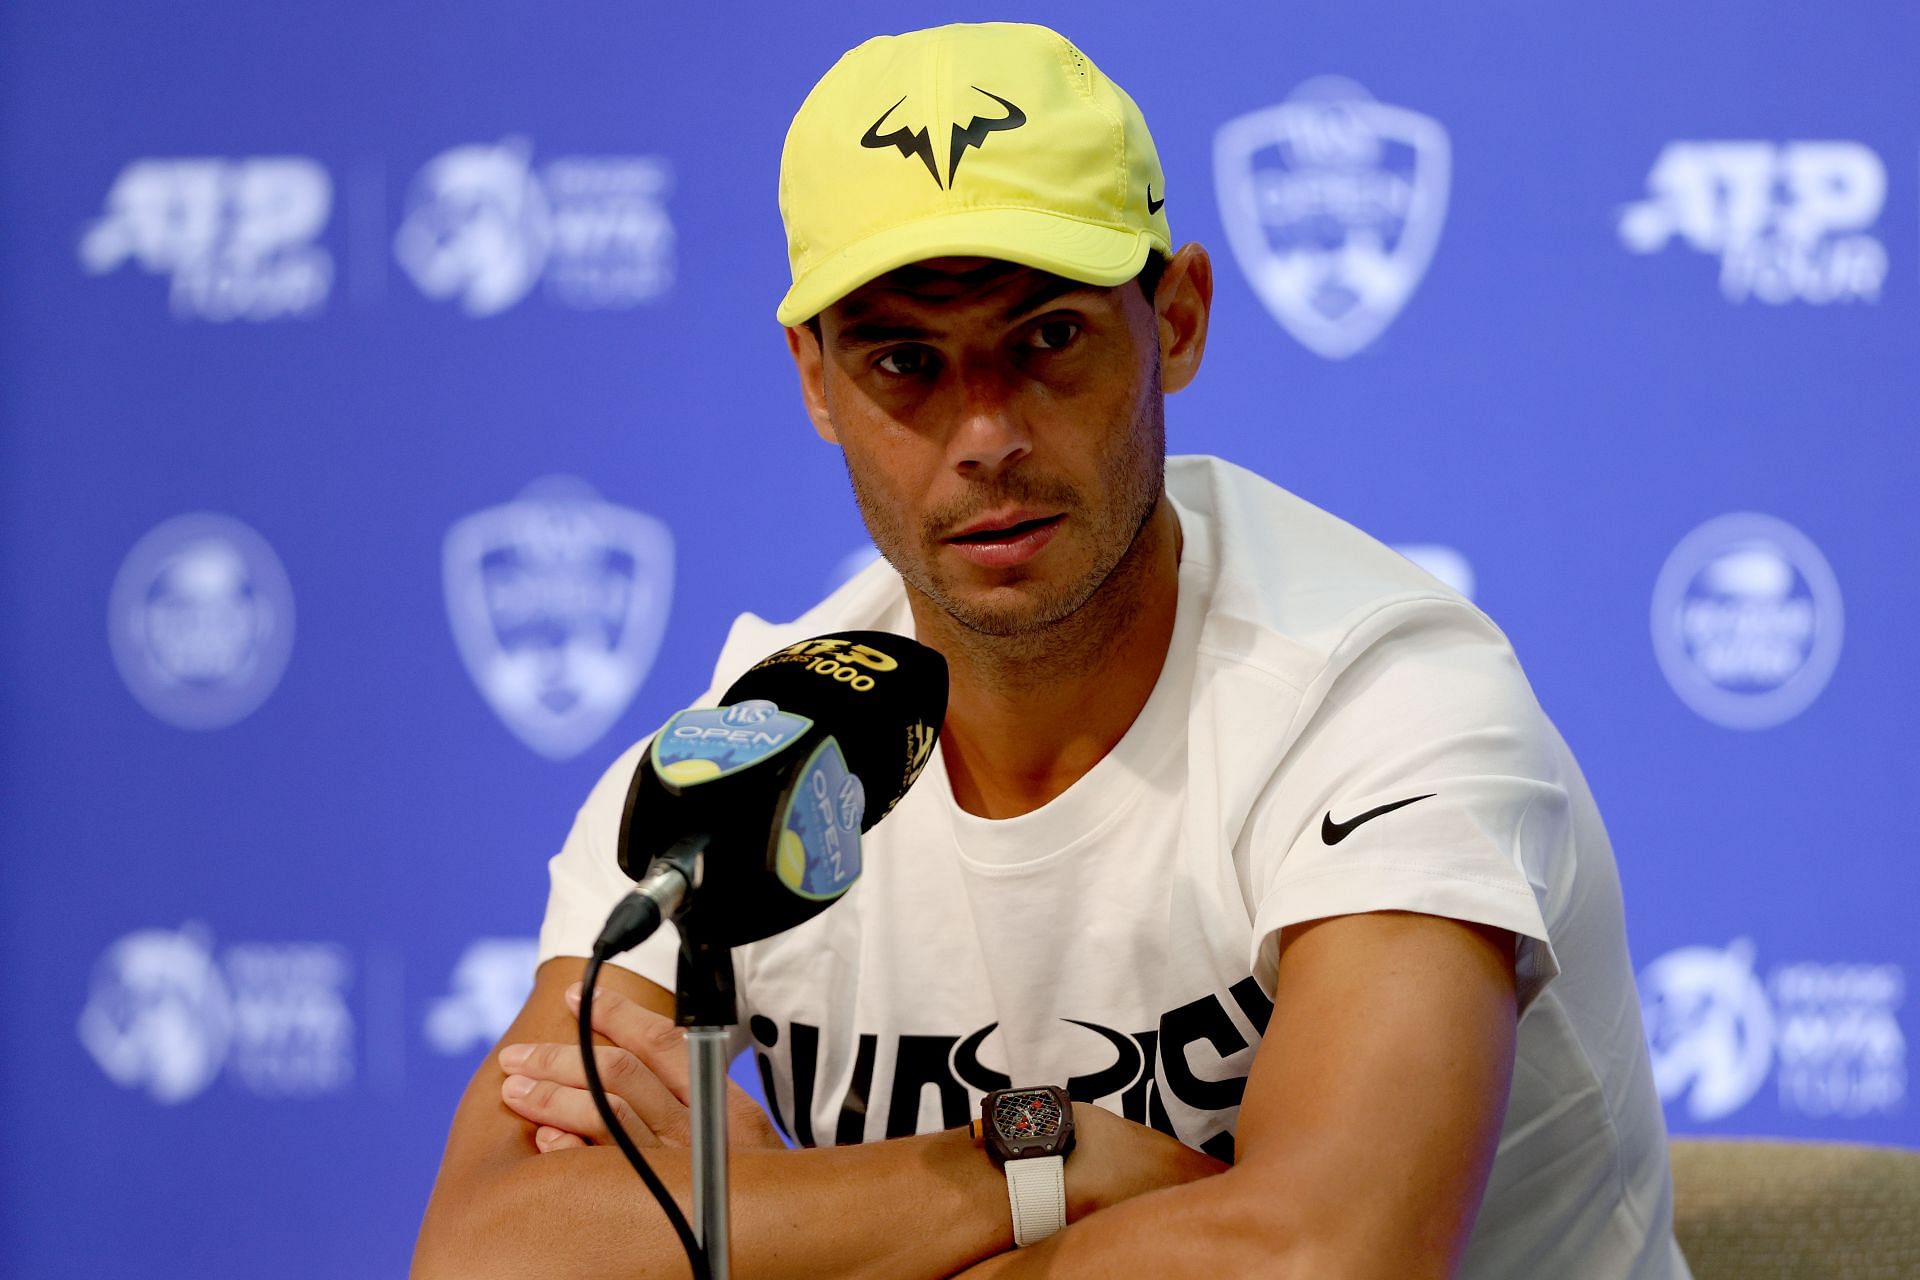 Rafael Nadal made an early exit at the 2022 Western &amp; Southern Open.